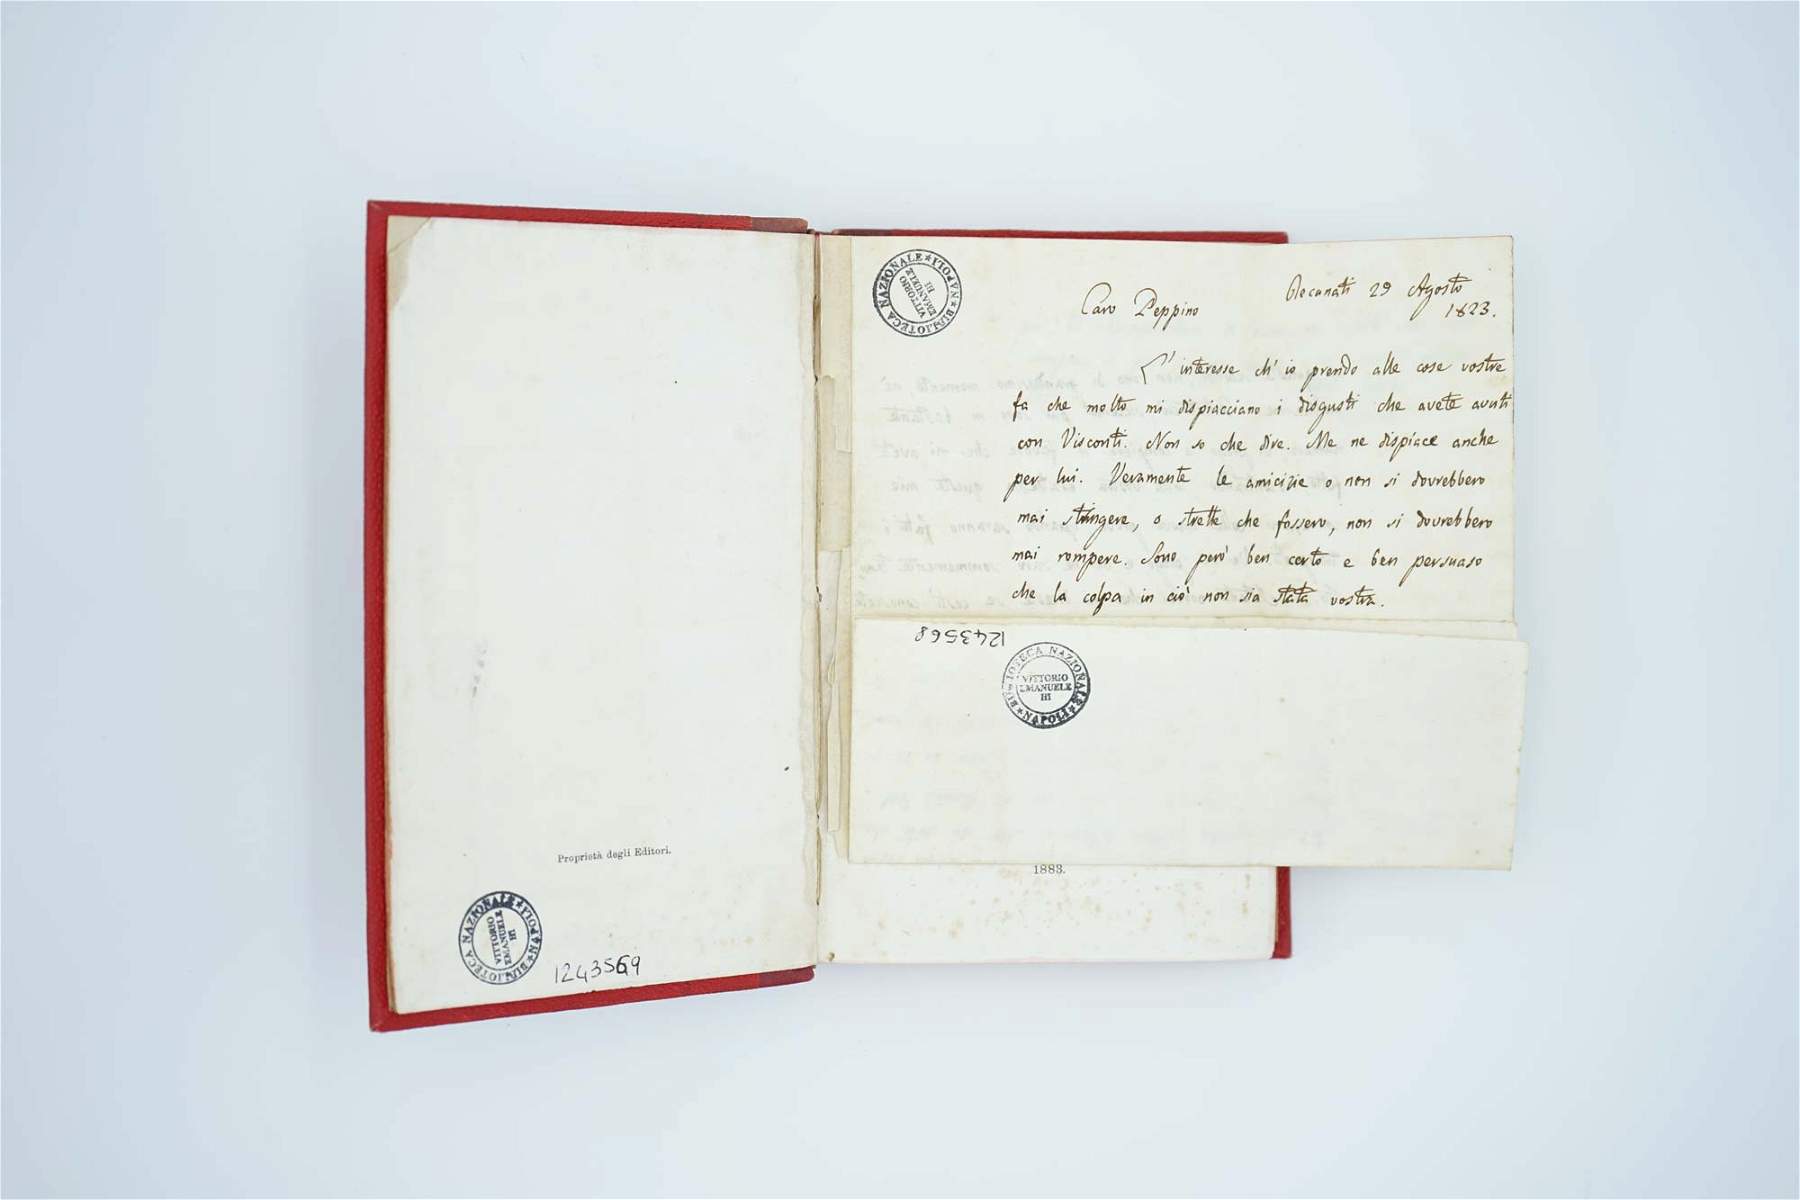 Naples National Library acquires a letter from Leopardi with a thought on friendship